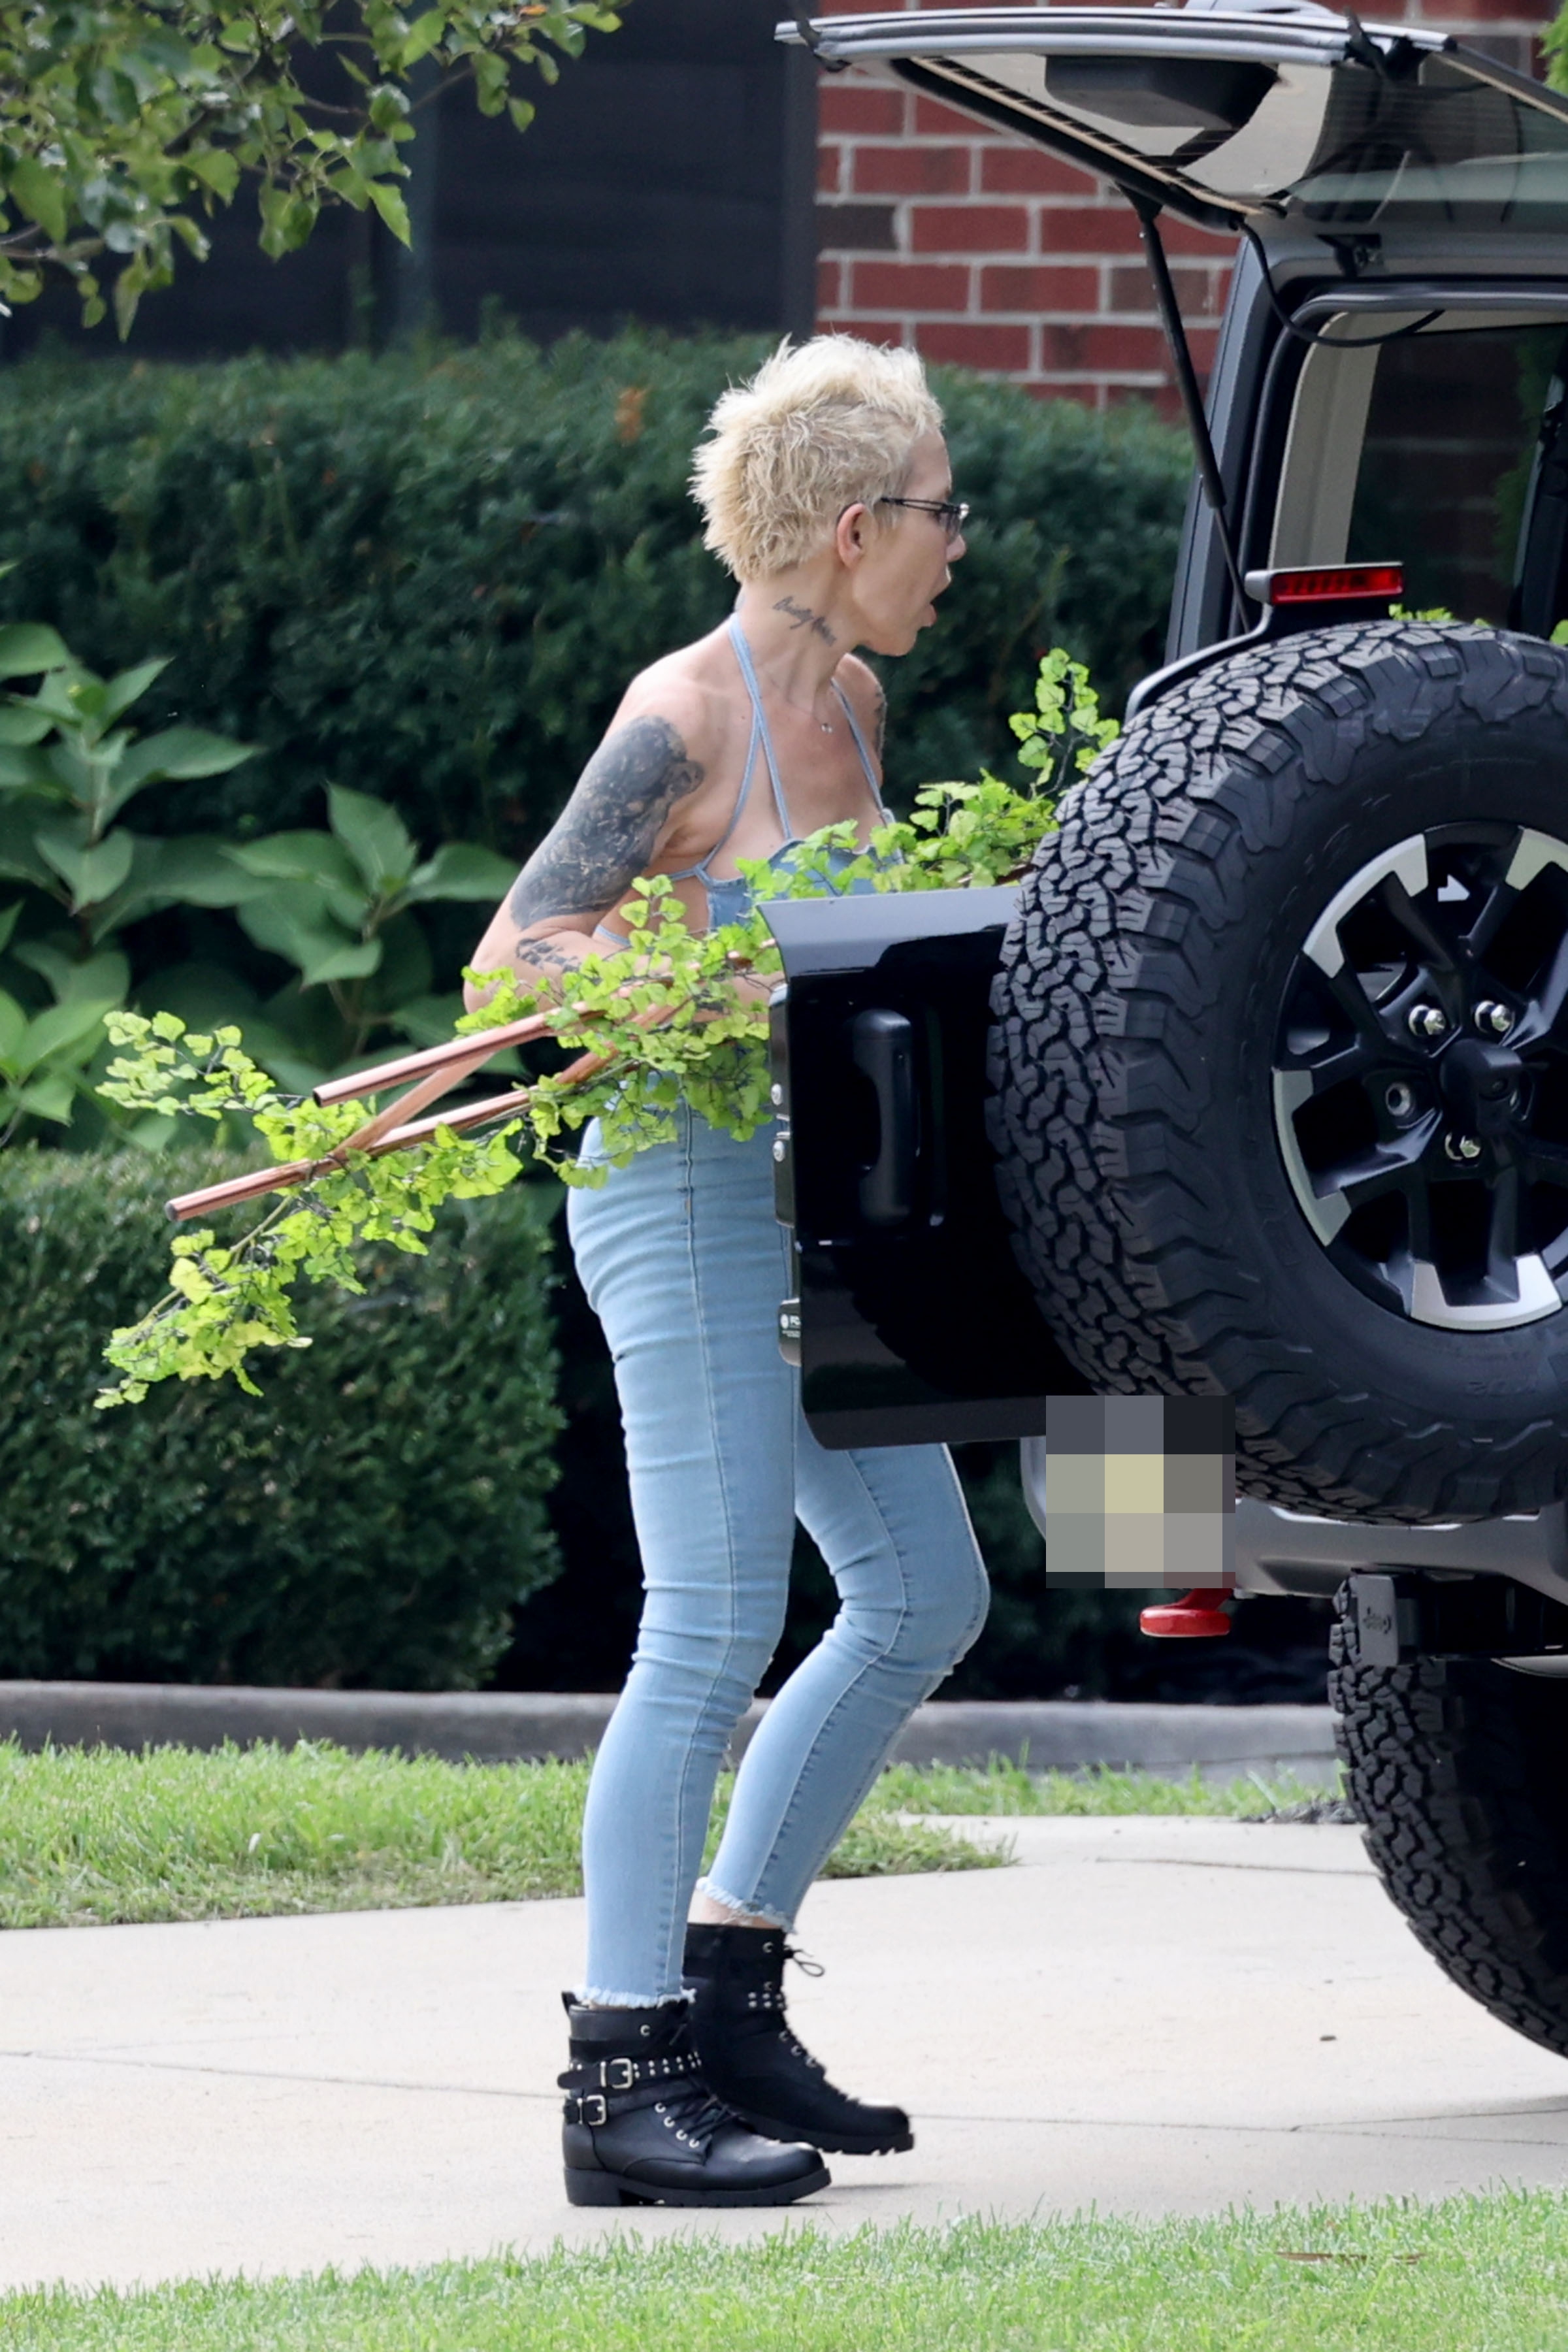 The superstar's ex was seen loading up her car last year as she debuted a new look